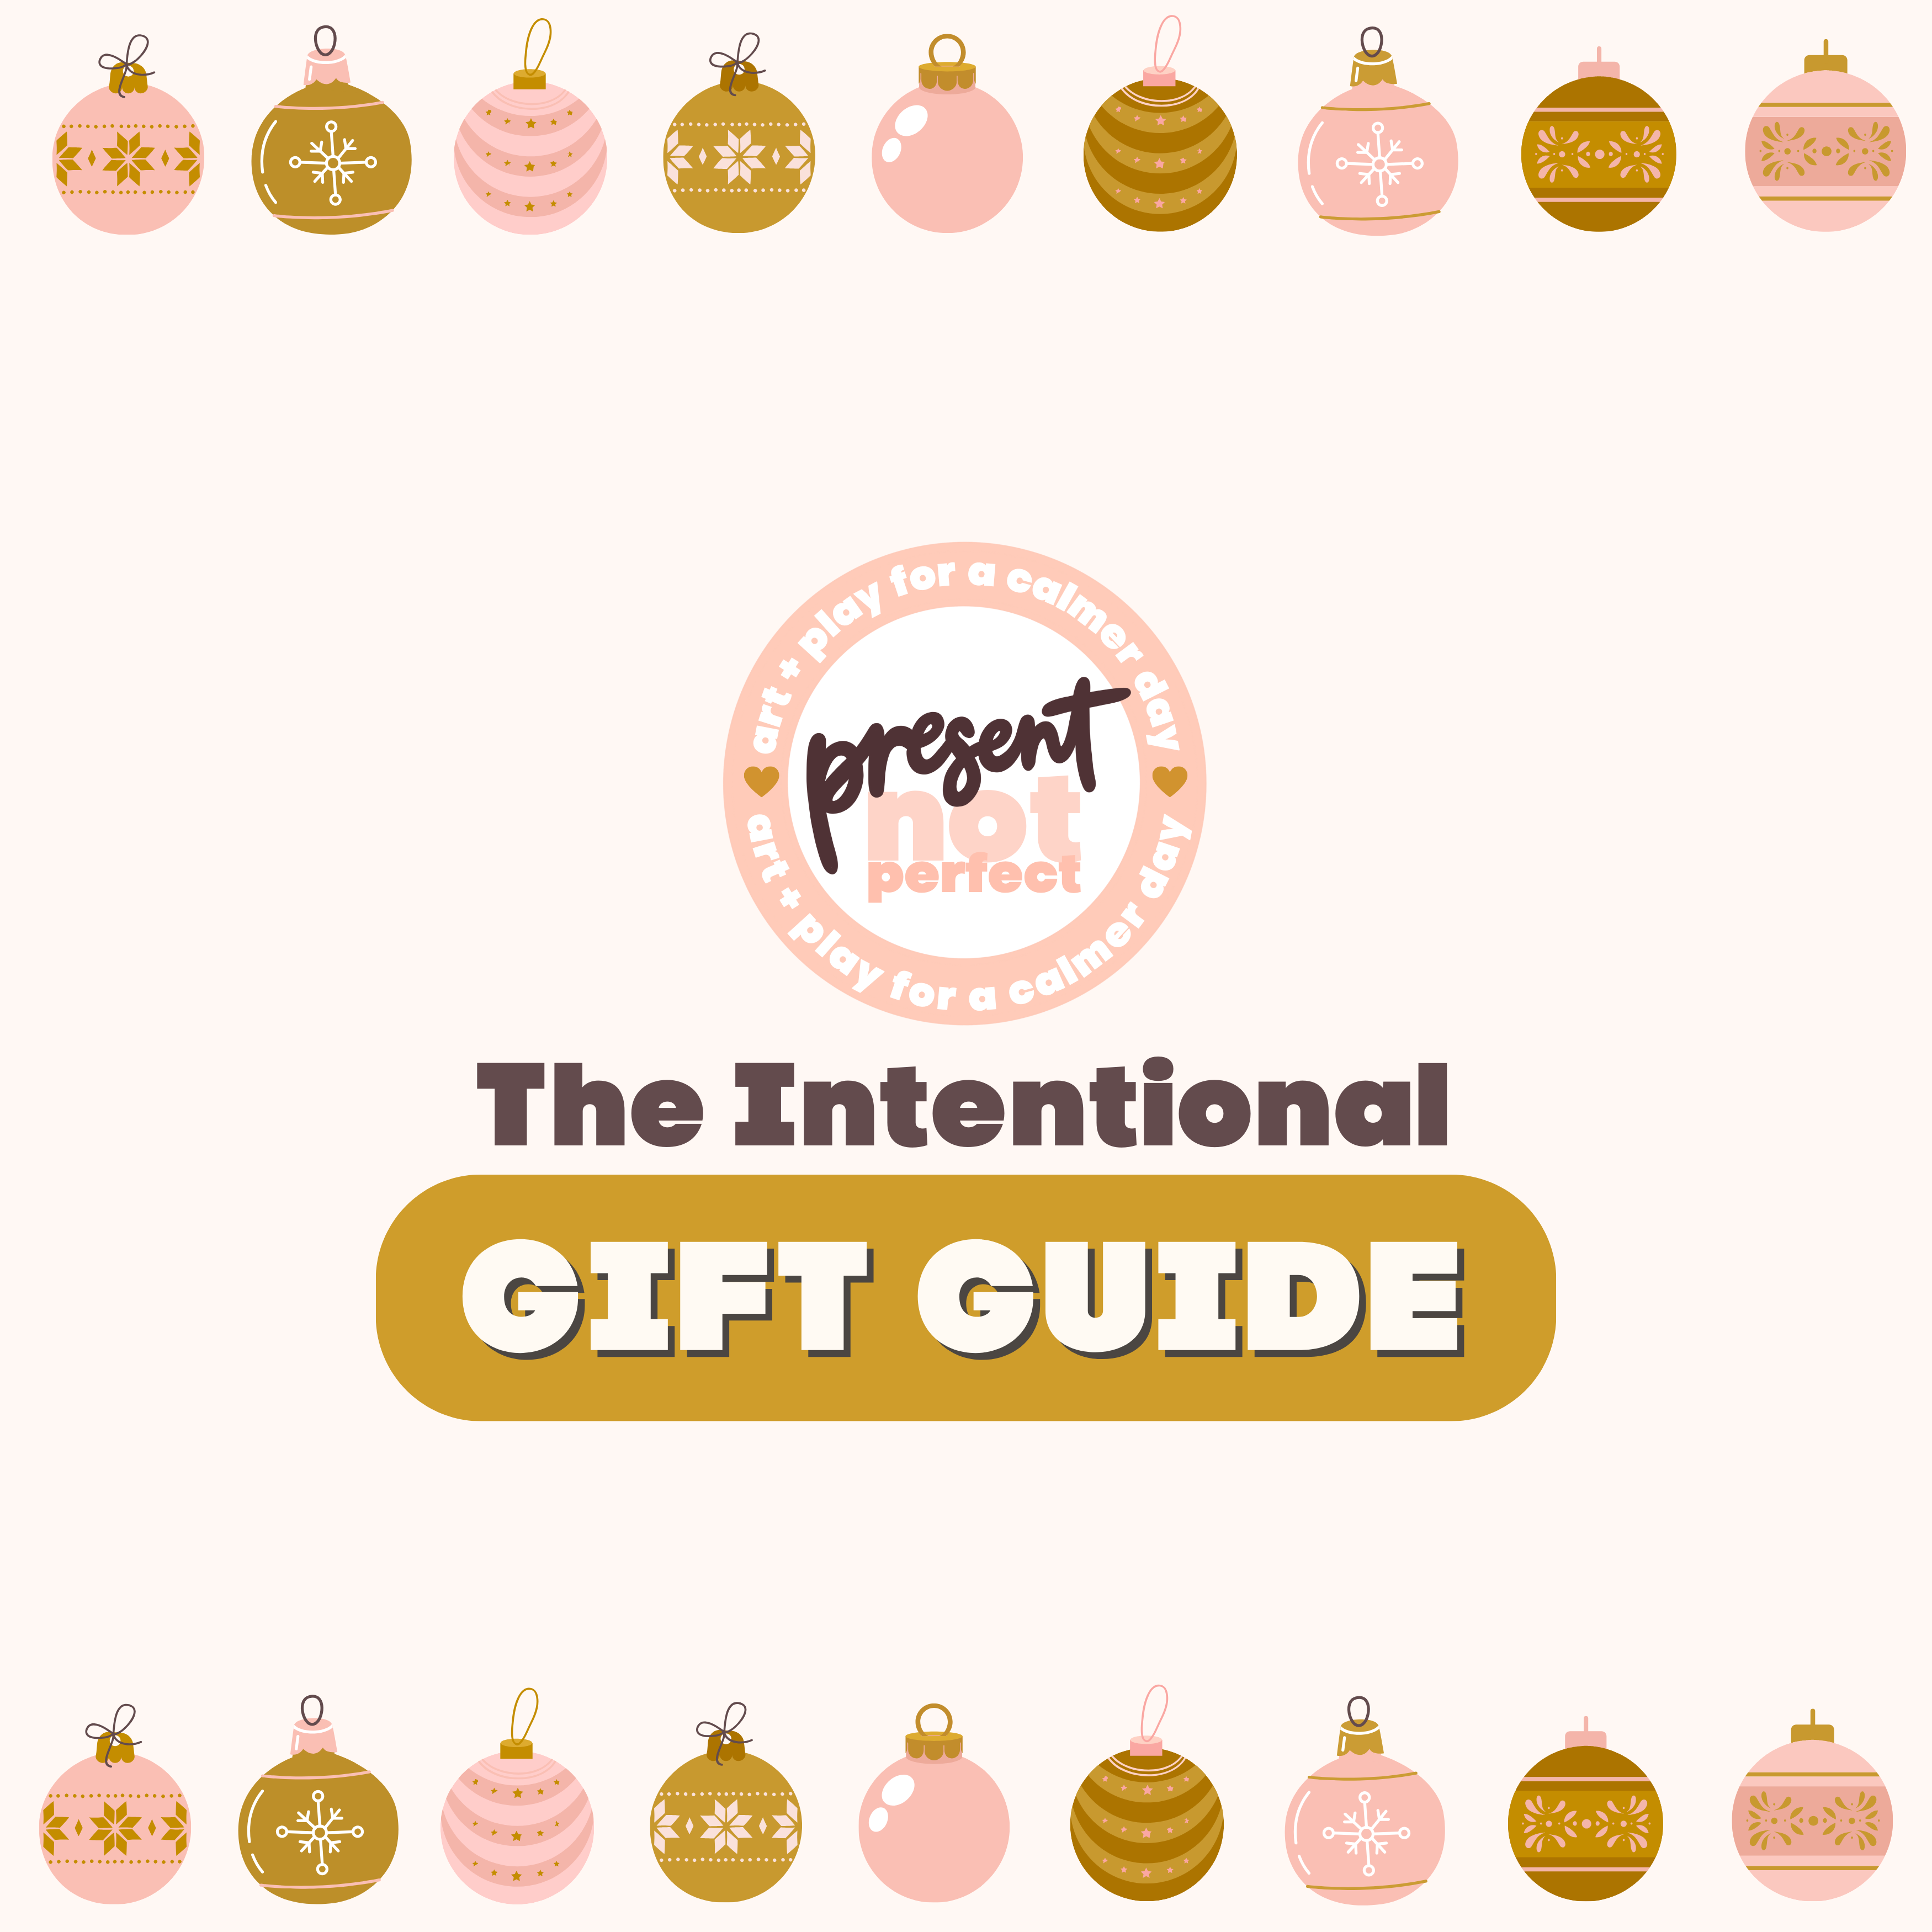 The Intentional Gift Guide 💗